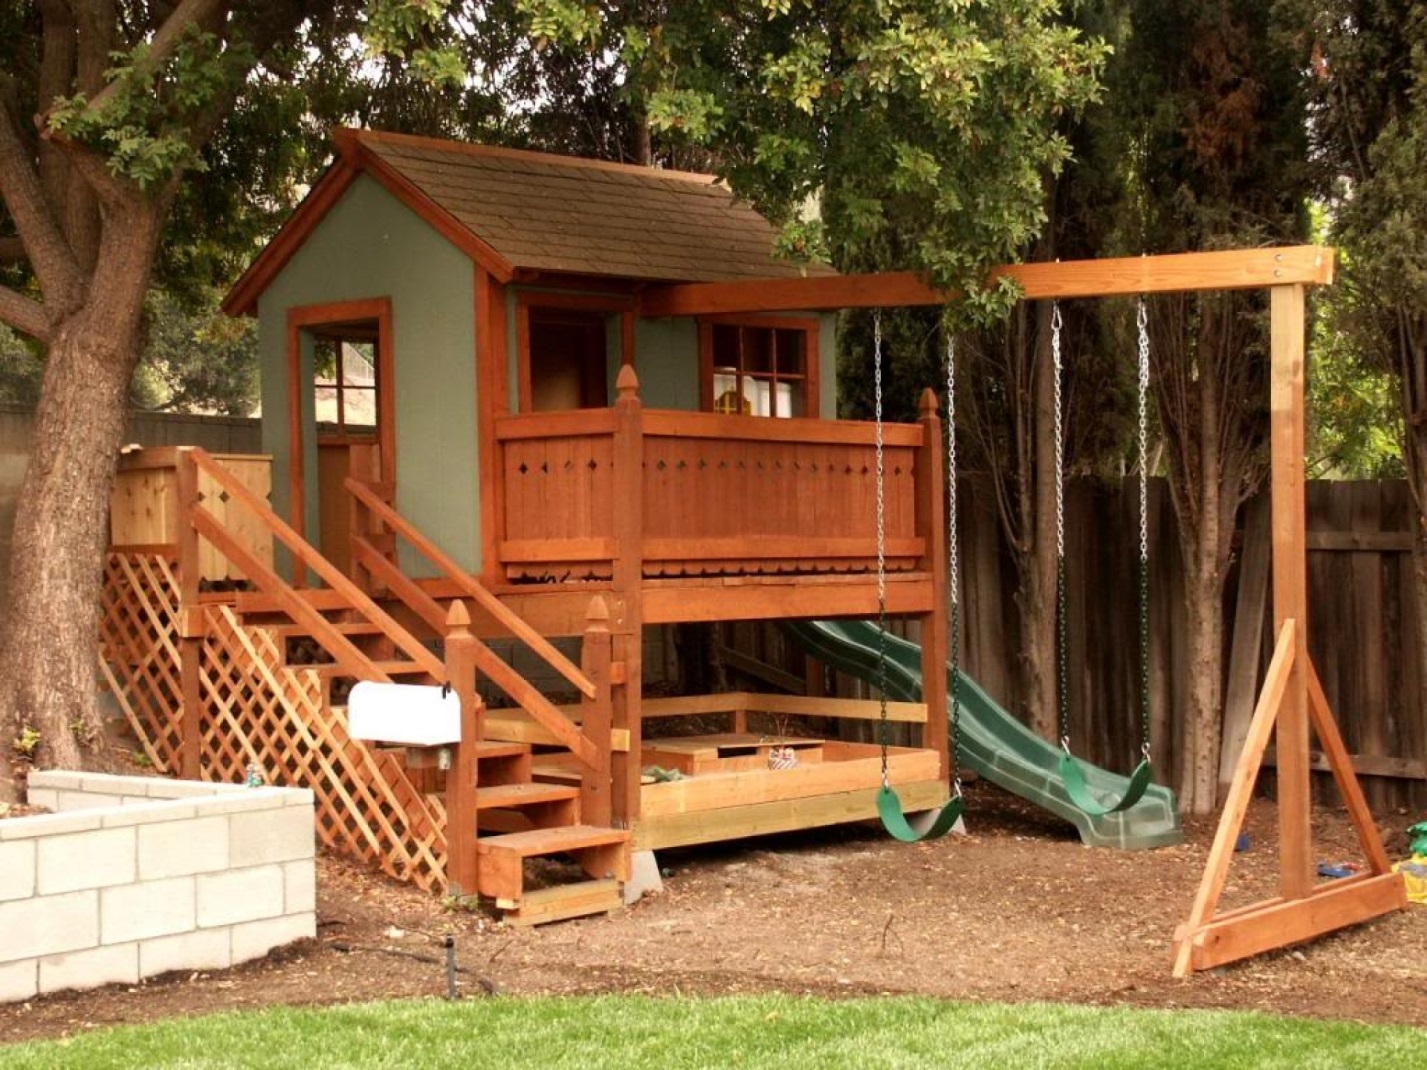 Wood playhouse with slide